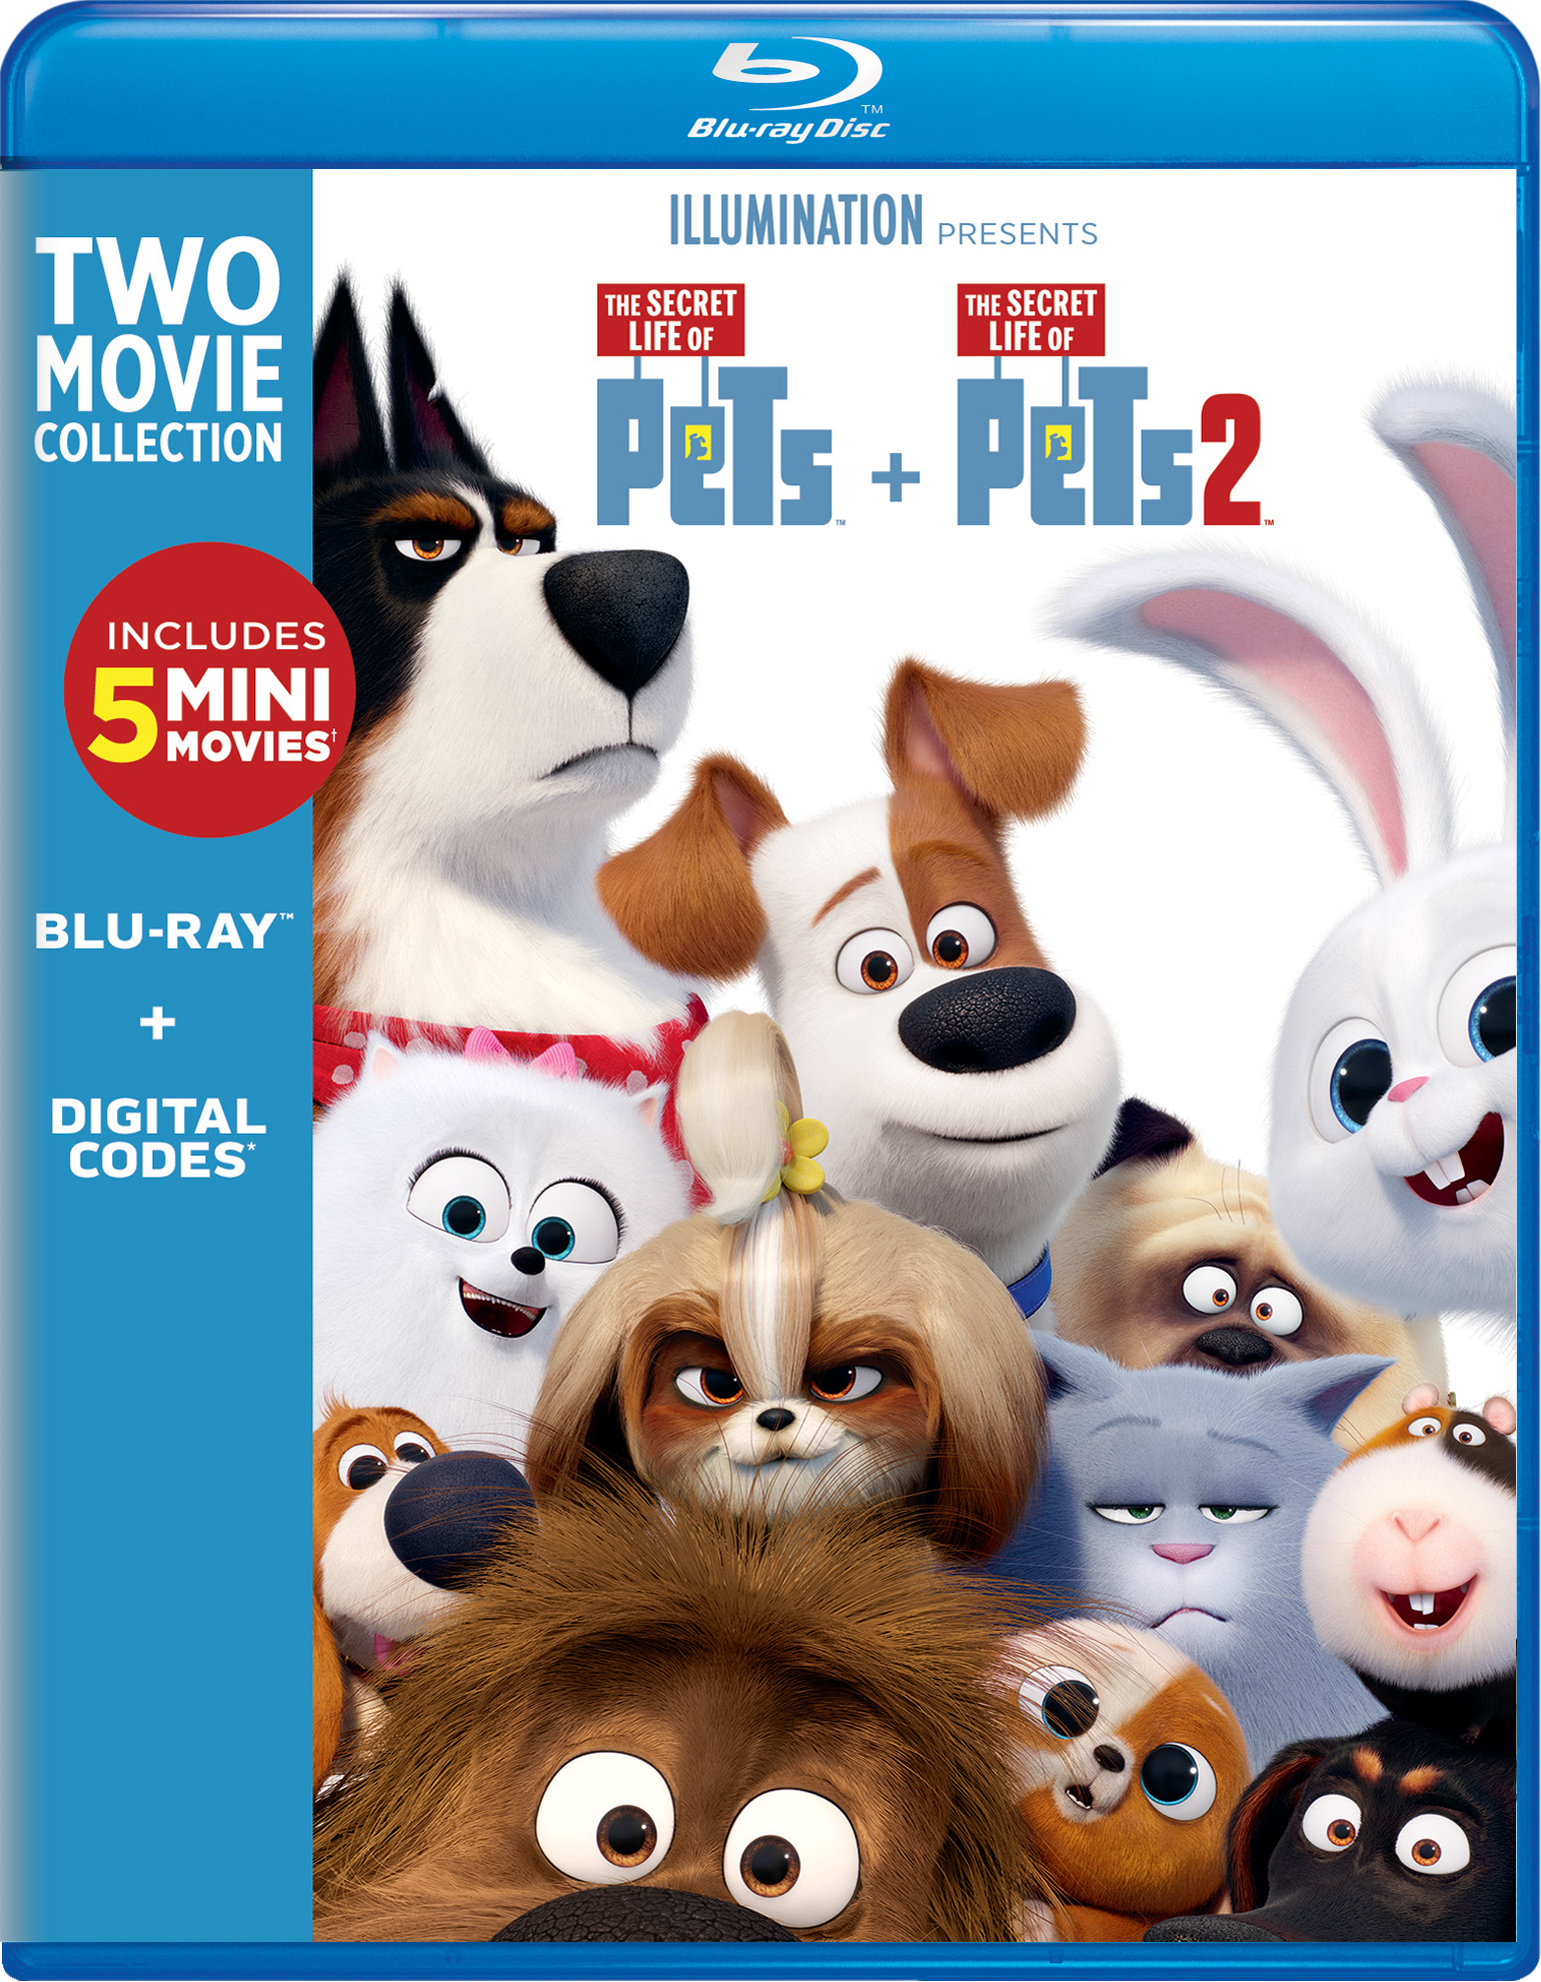 Official Illuminations The Secret Life of pets 2 MAX Plush Doll Soft Toys 8" 